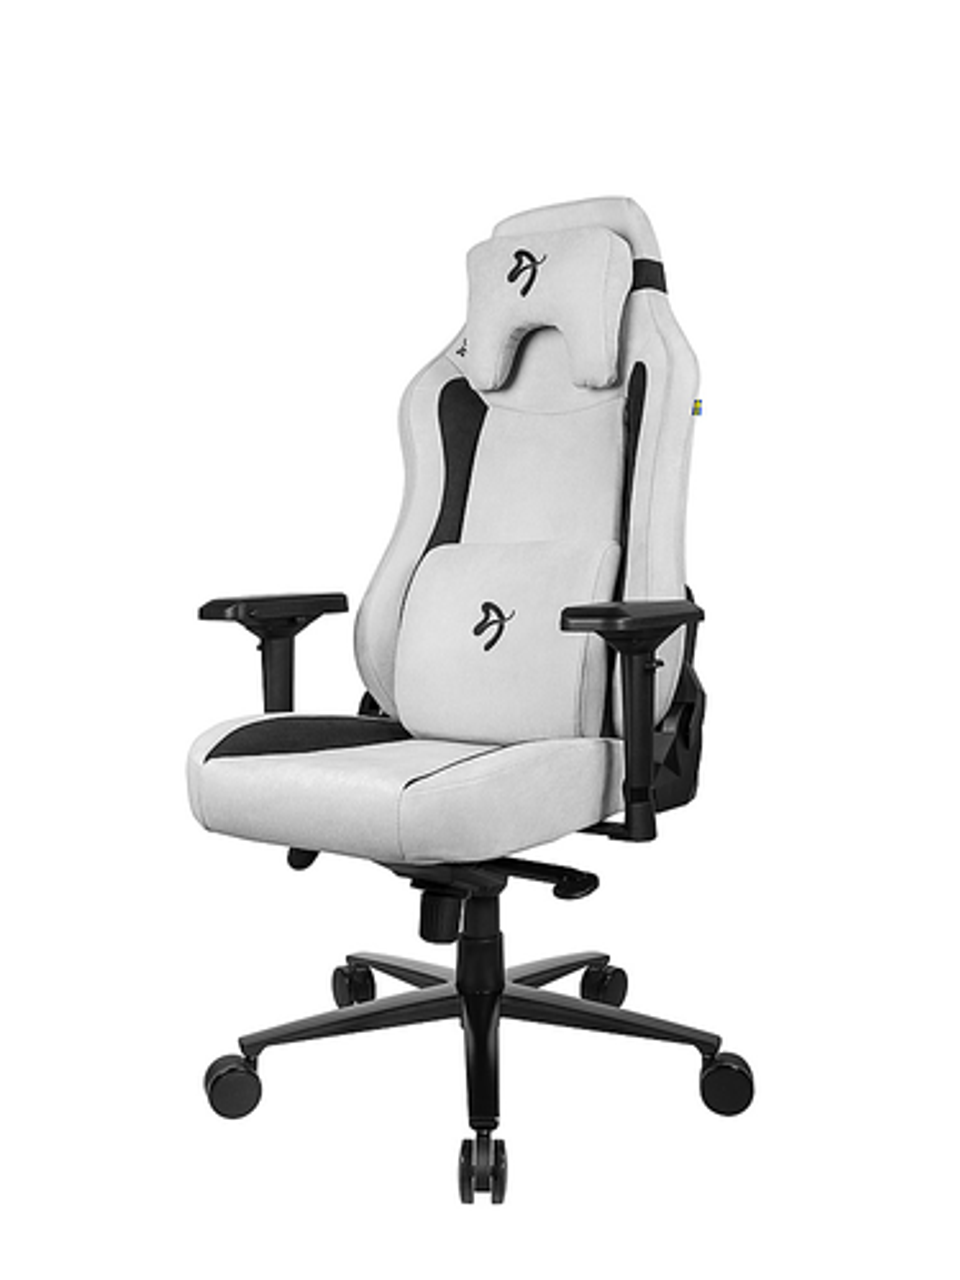 Arozzi - Vernazza Series Top-Tier Premium Supersoft Upholstery Fabric Office/Gaming Chair - Light Gray